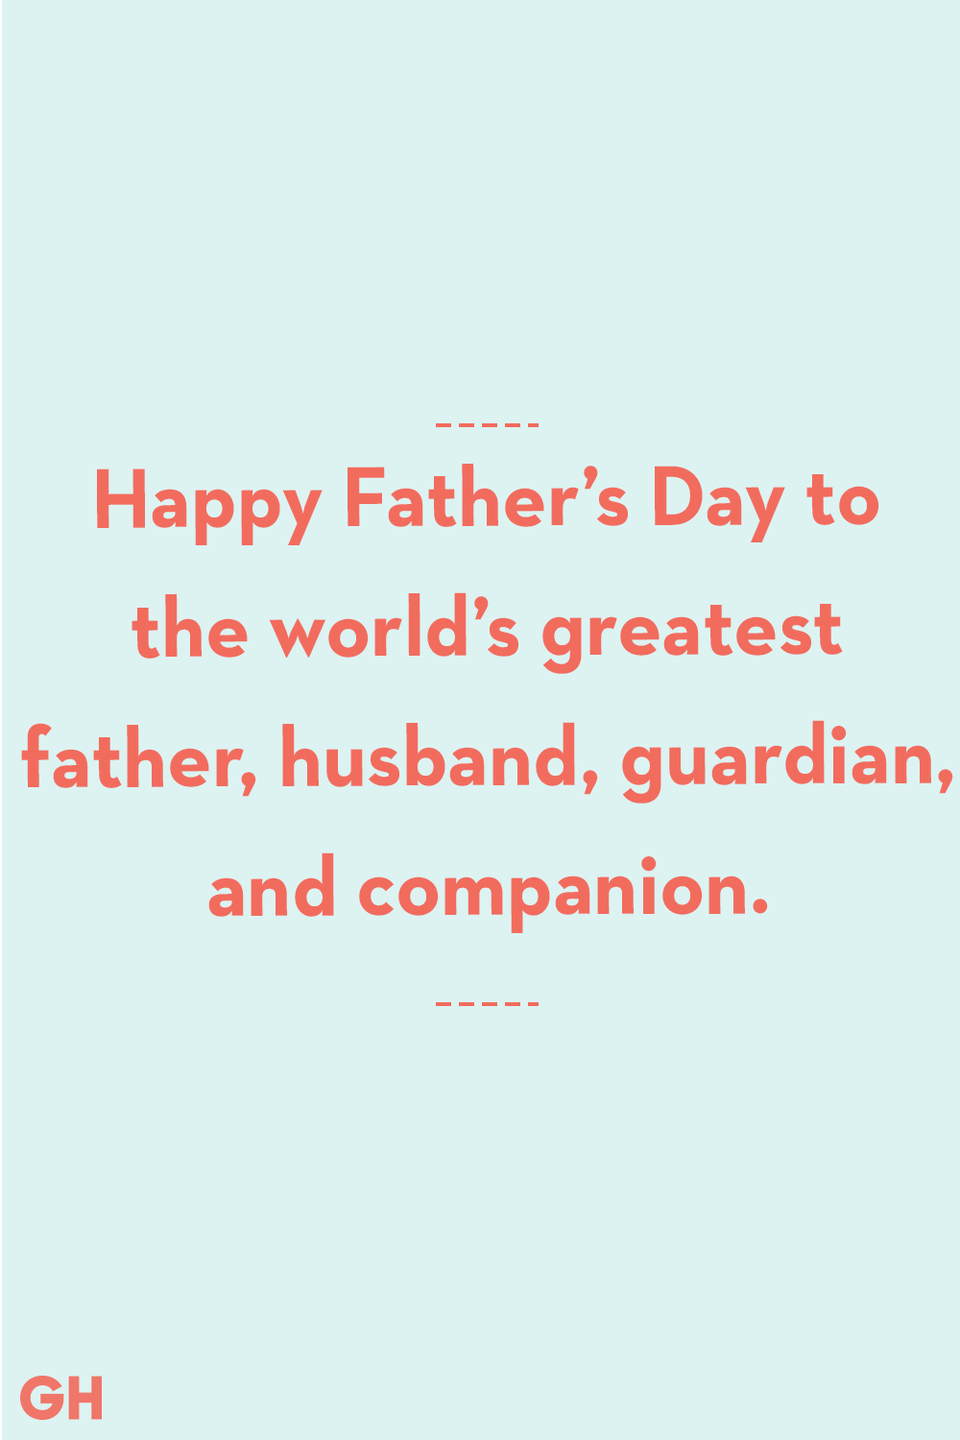 <p>Happy Father’s Day to the world’s greatest father, husband, guardian, and companion.</p>